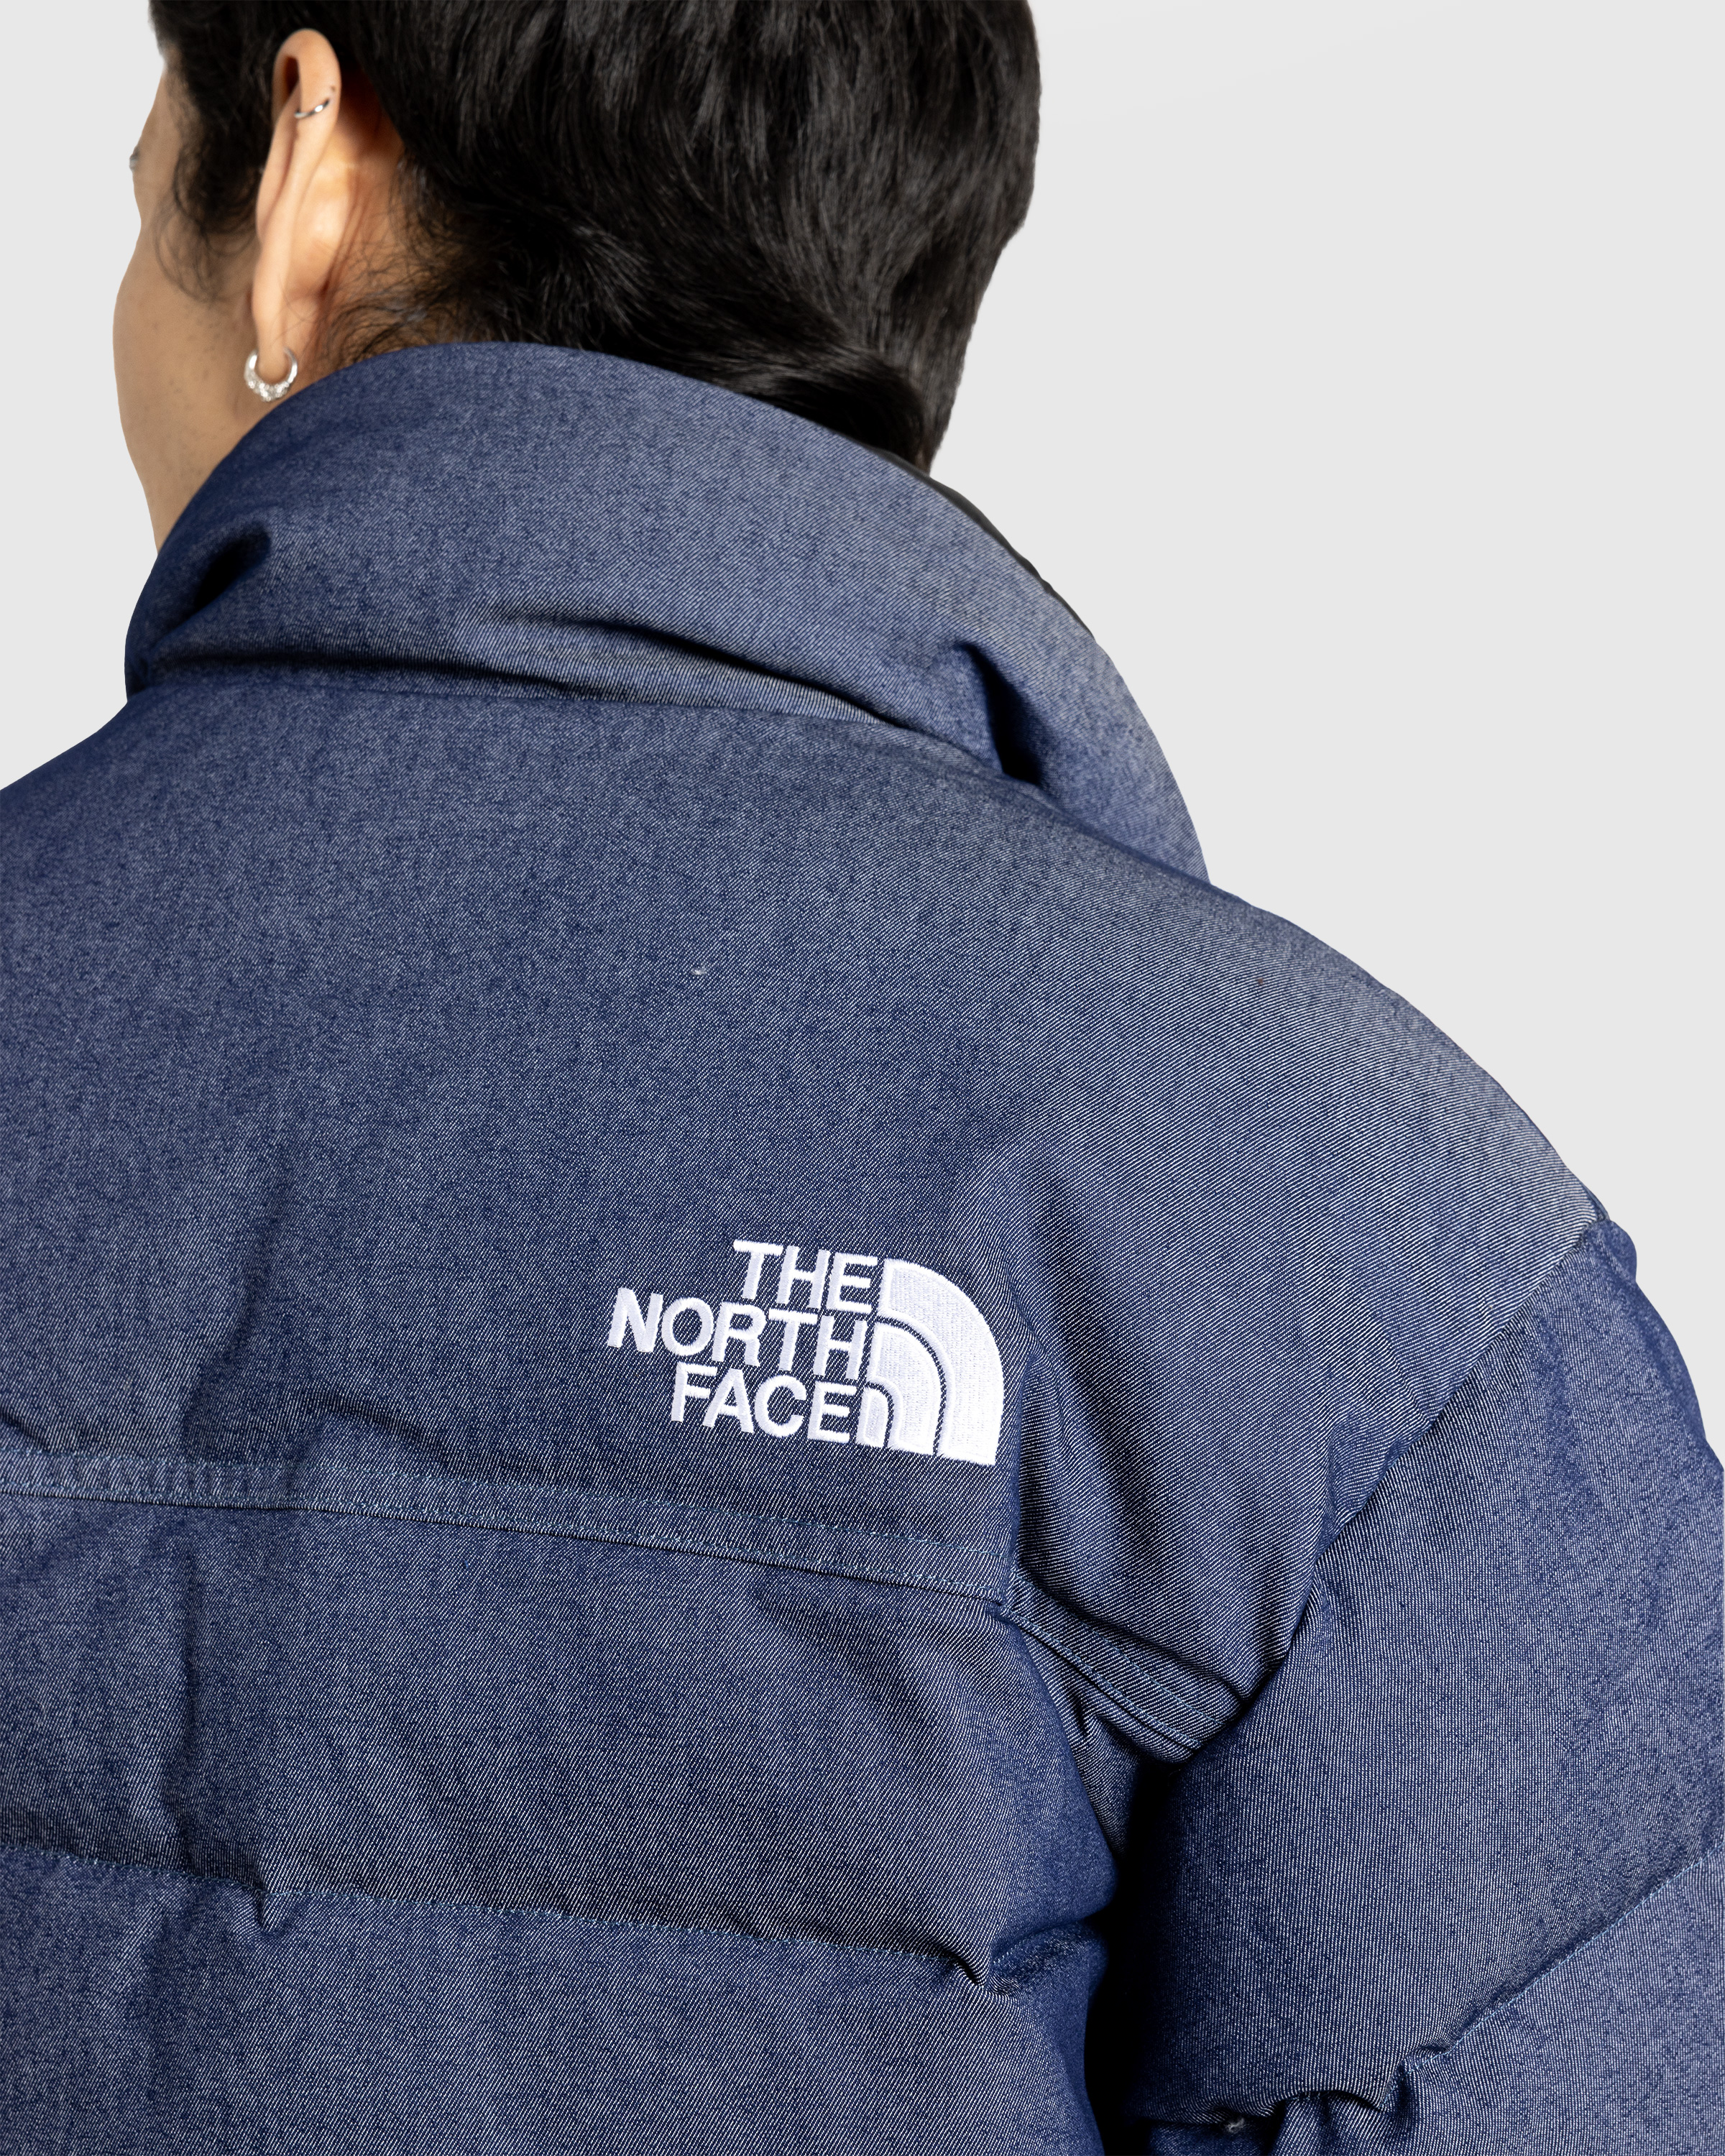 The North Face – ’92 Reversible Nuptse Jacket Sulphur Moss/Coal Brown-2 - Outerwear - Blue - Image 6